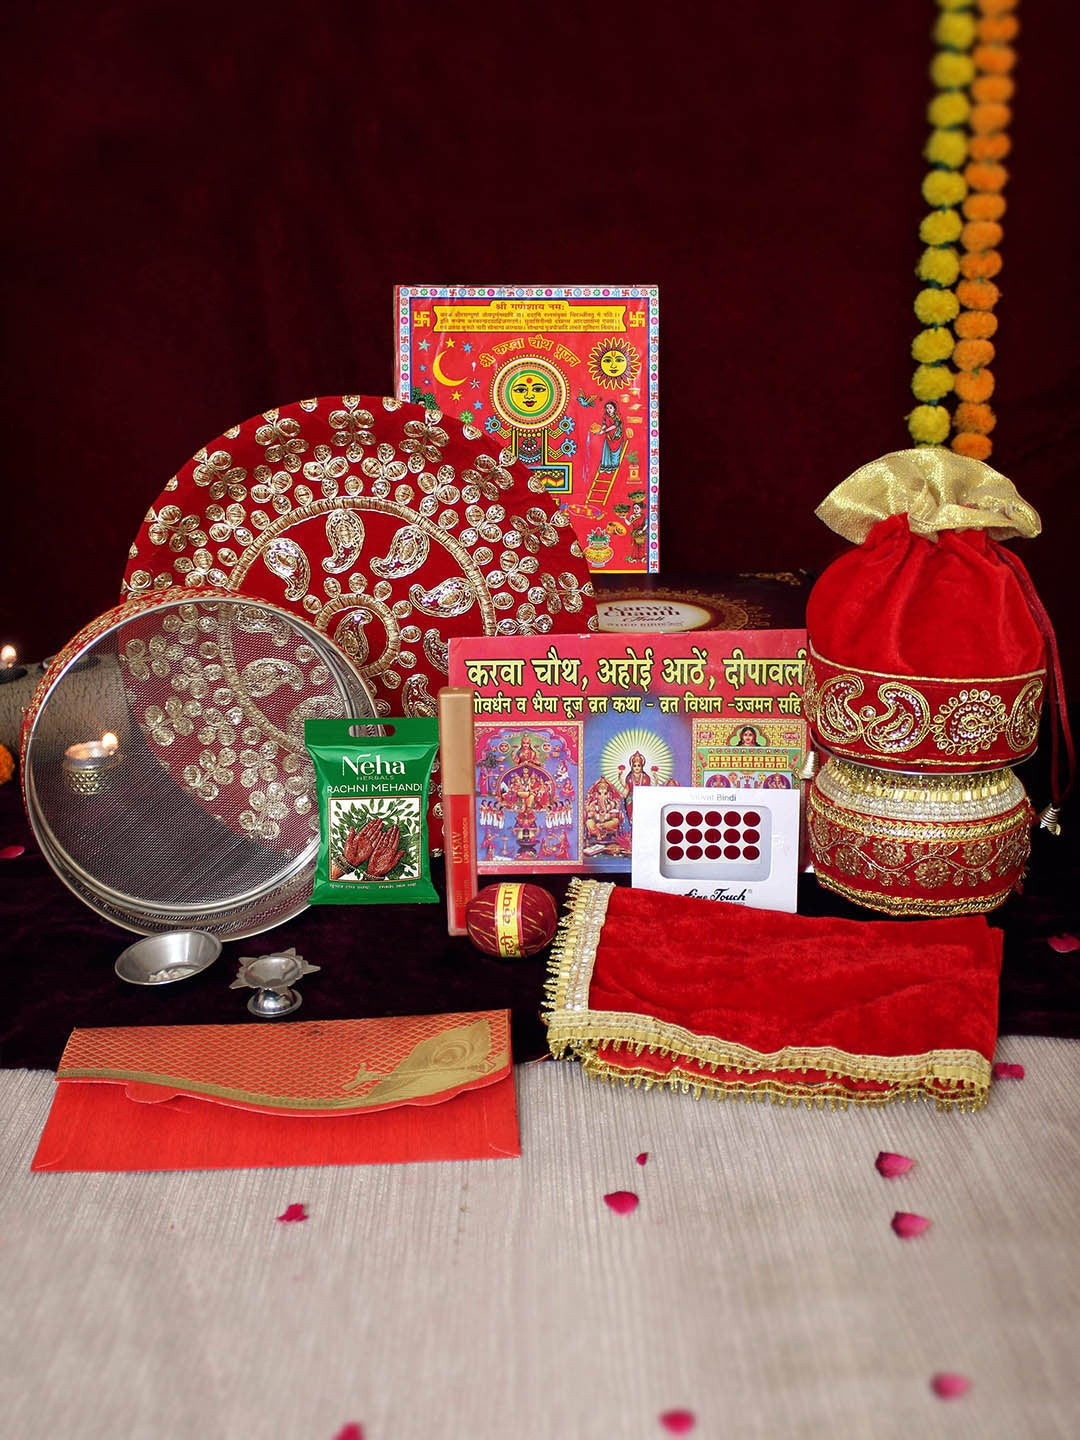 Karwa Chauth gift ideas for your wife - India Today